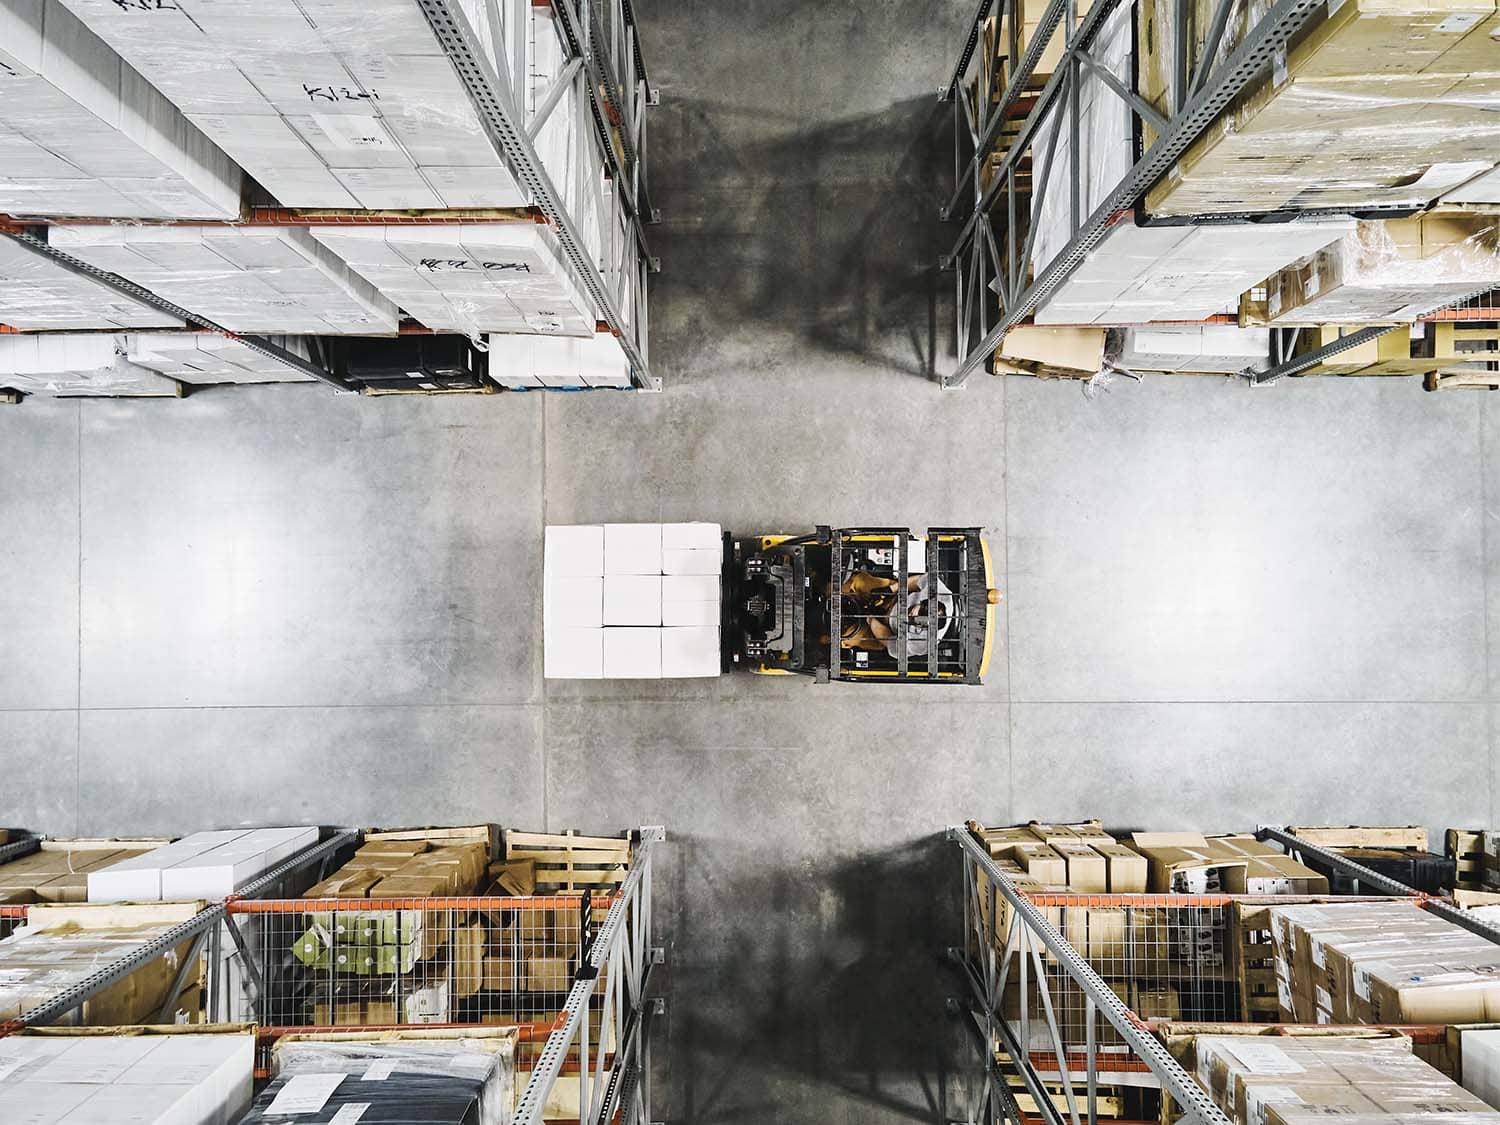 Overhead image of forklift moving through warehouse aisles